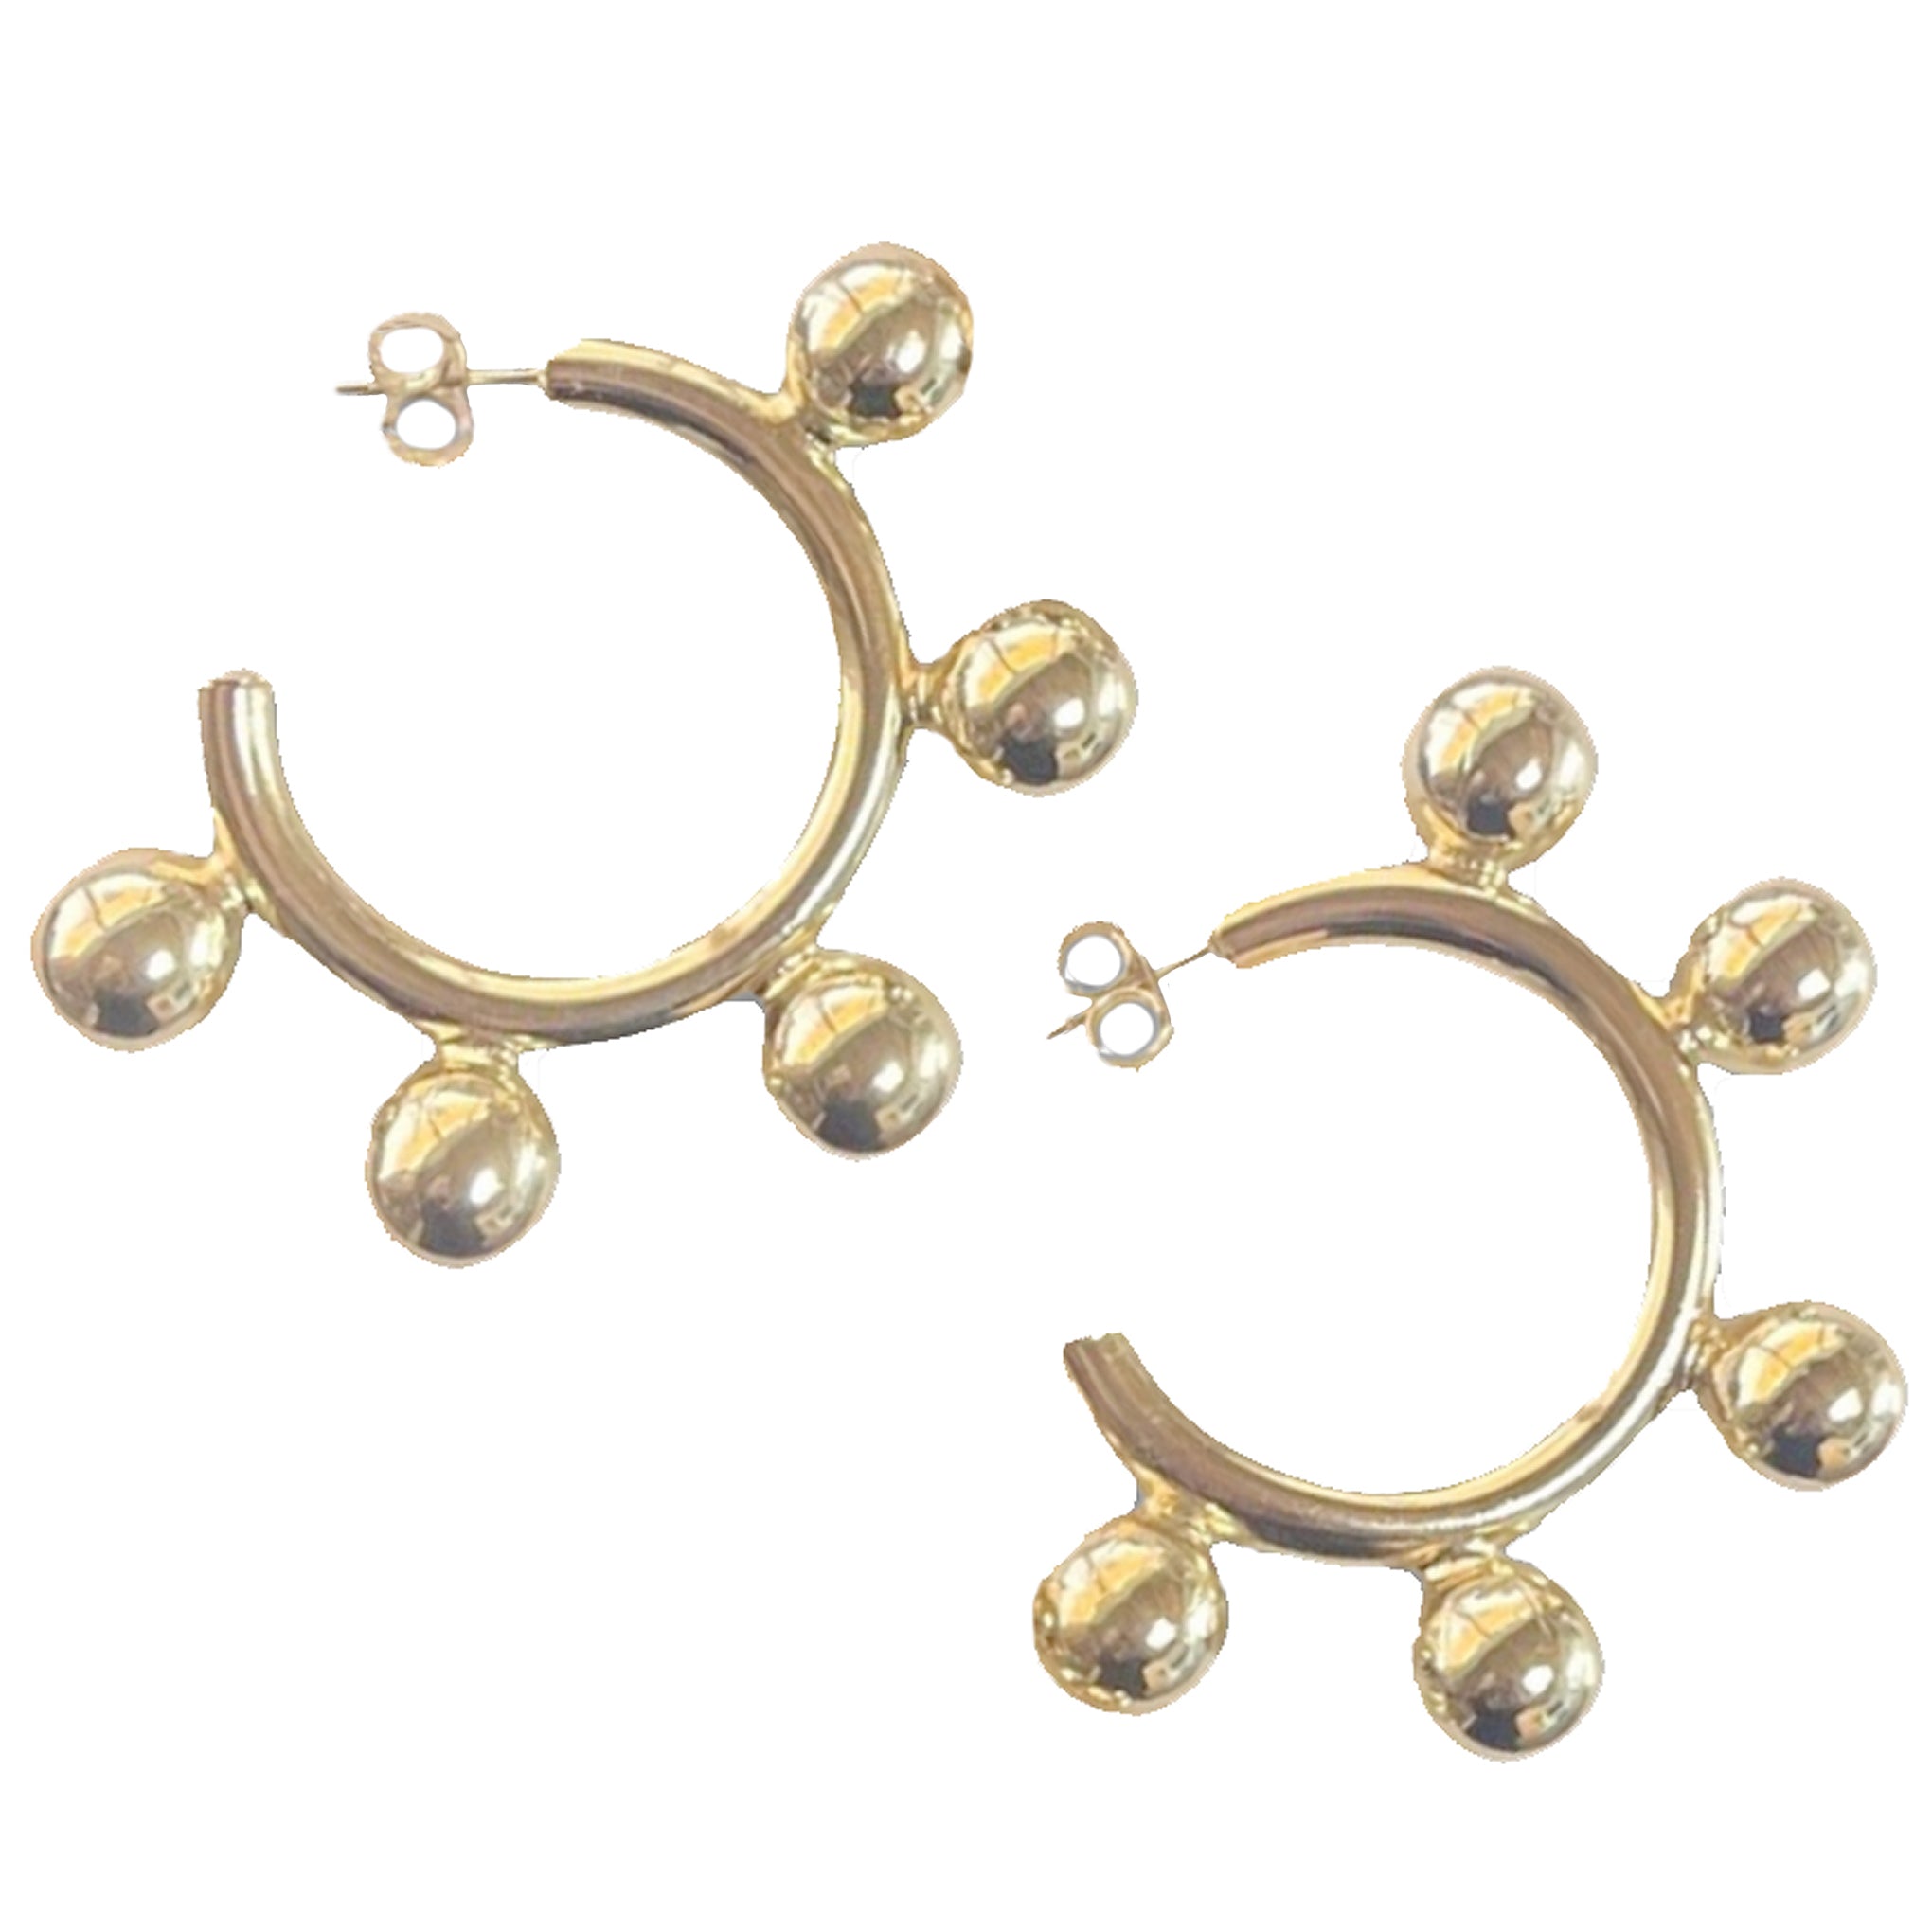 Sheila Fajl Augusta Large Ball Statement Hoop Earrings in Polished Gold Plated